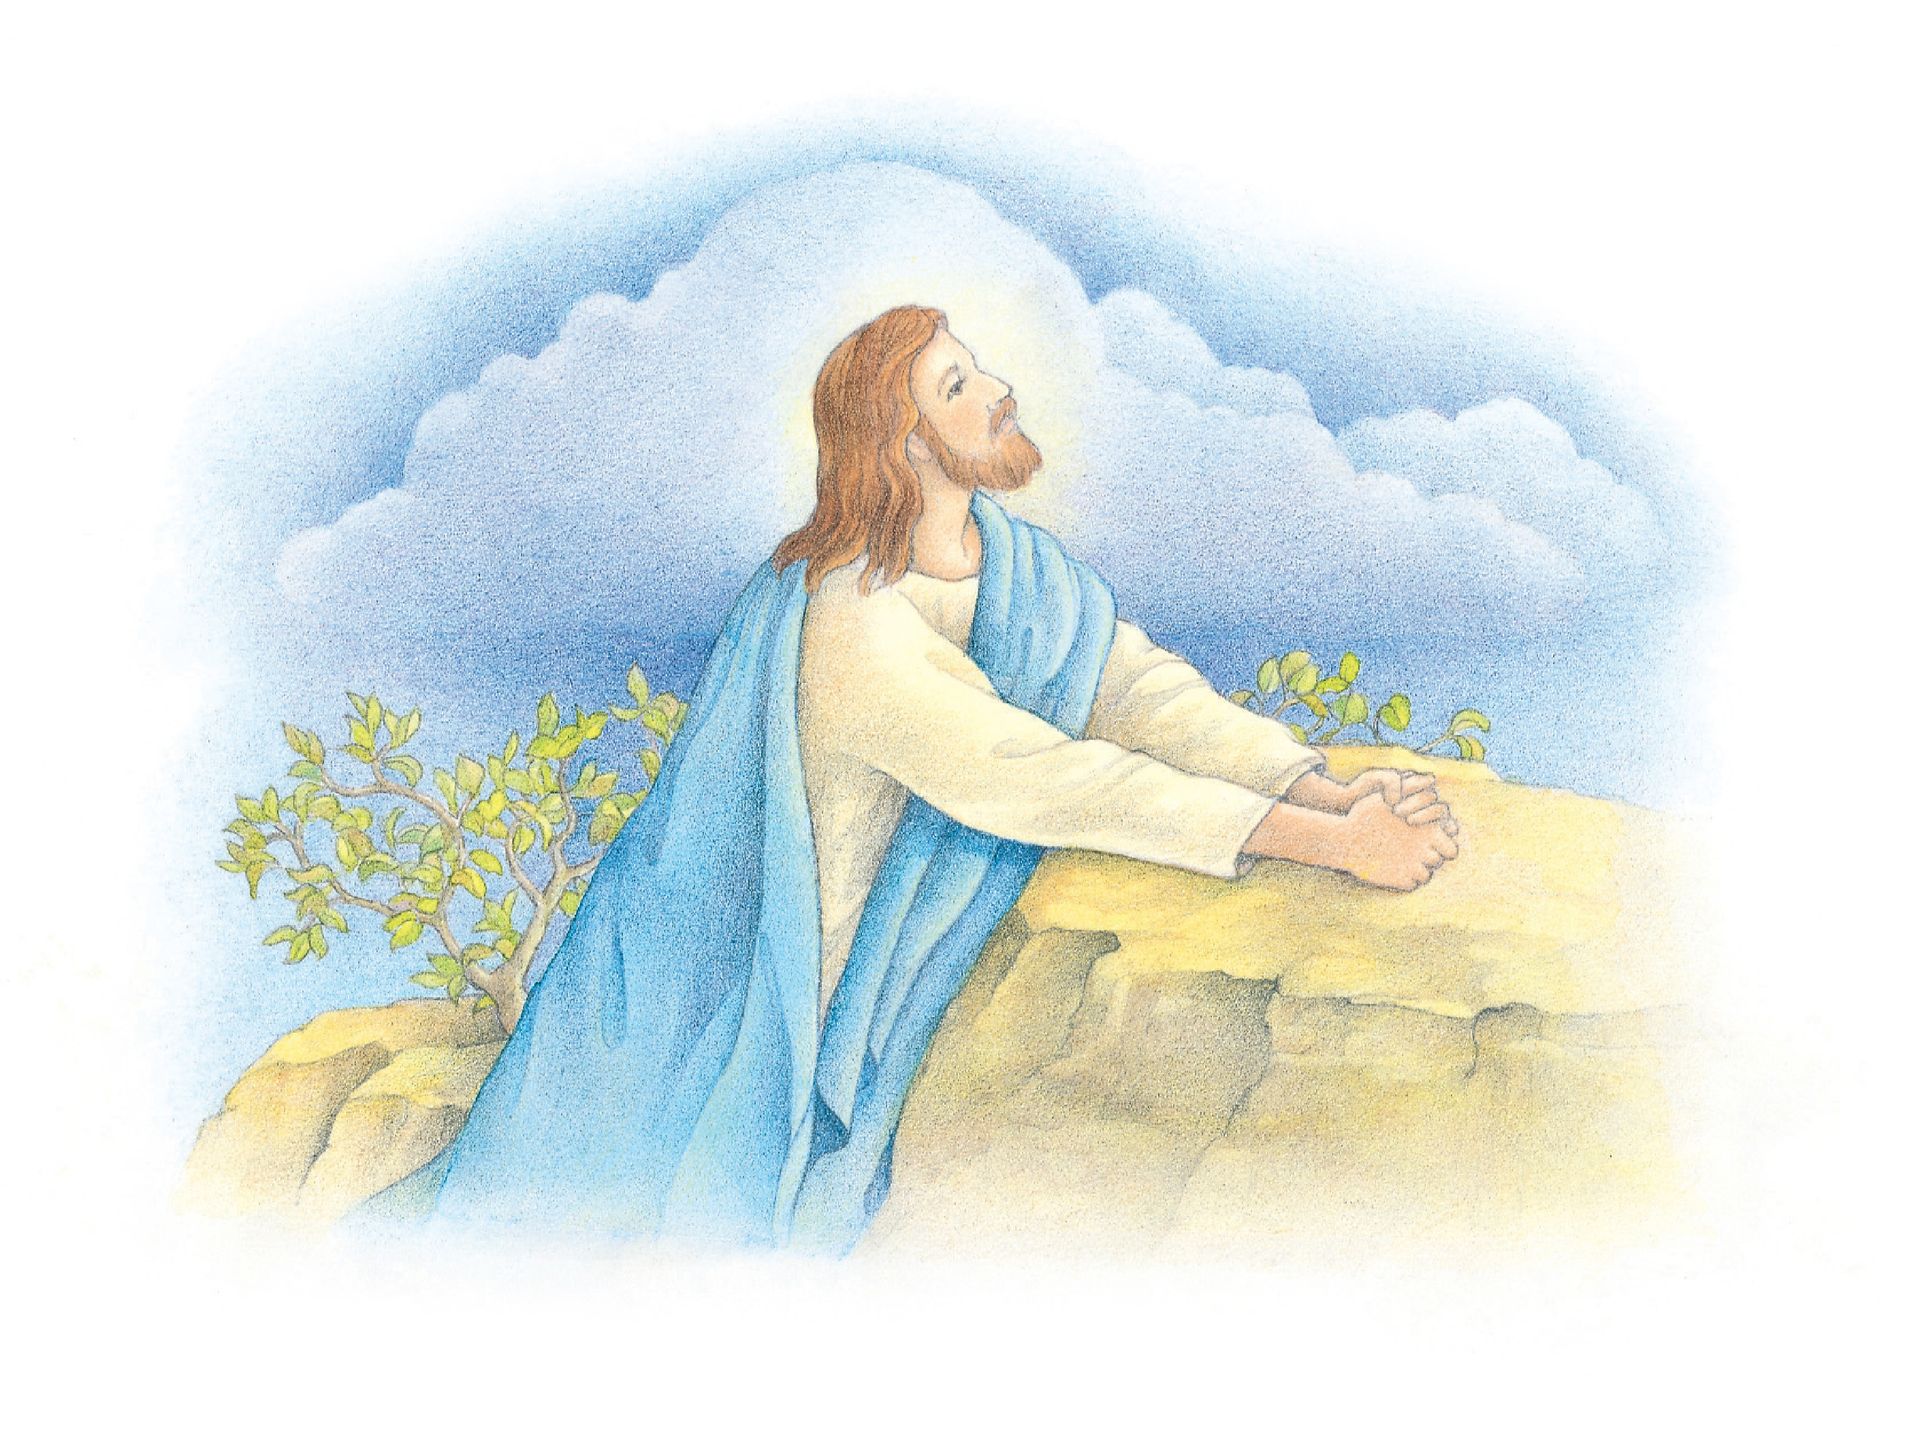 Christ praying in the Garden of Gethsemane. From the Children’s Songbook, page 123, “The Third Article of Faith”; watercolor illustration by Beth Whittaker.